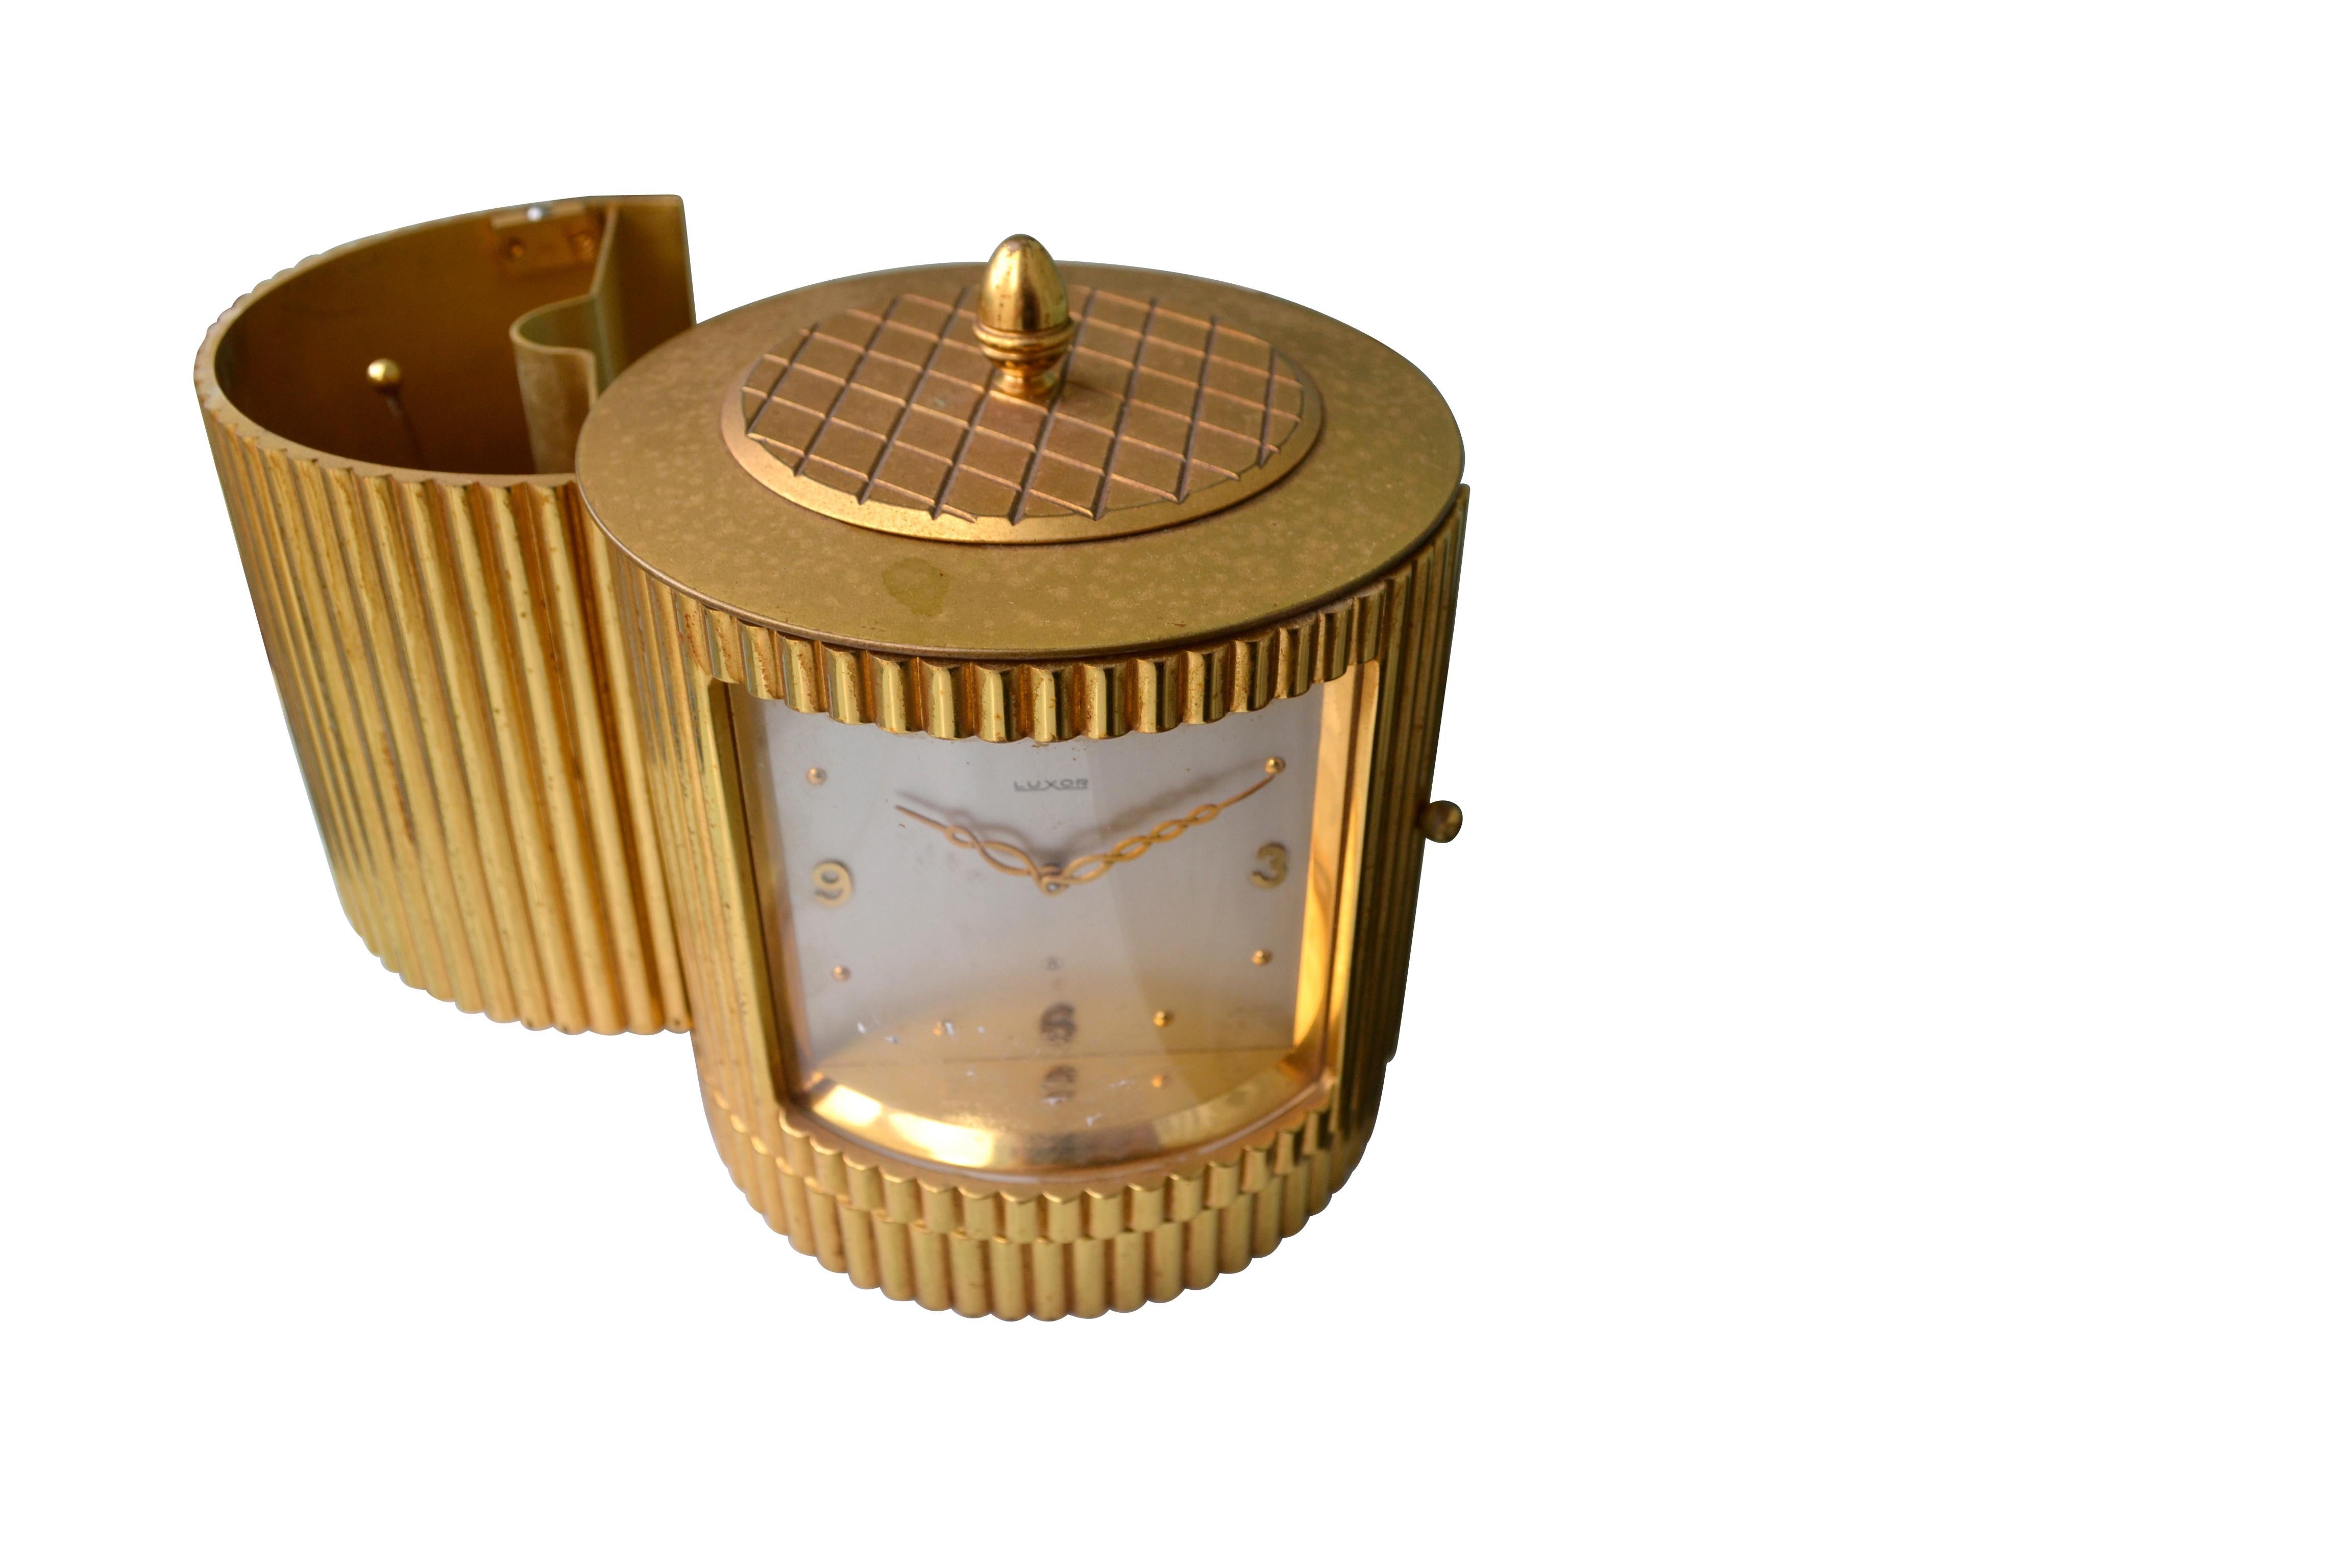 Mid-Century Modern Midcentury Swiss Made Luxor Brass Table Clock and Concealed Cigarette Case